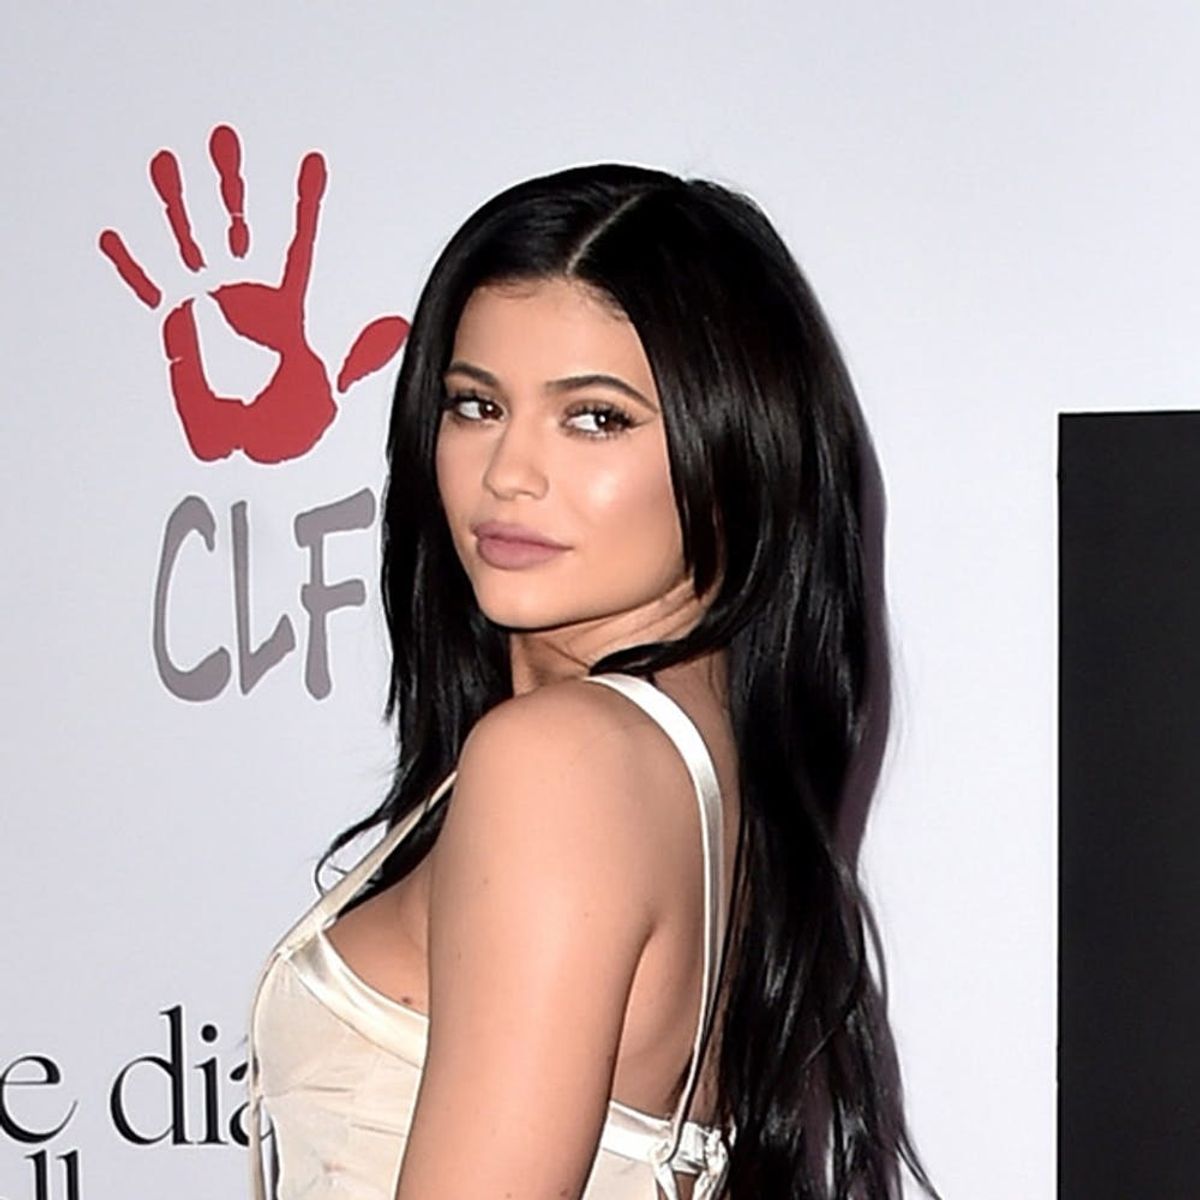 Kylie Jenner Teased Her New Lip Kit Colors in a Super Sneaky Way